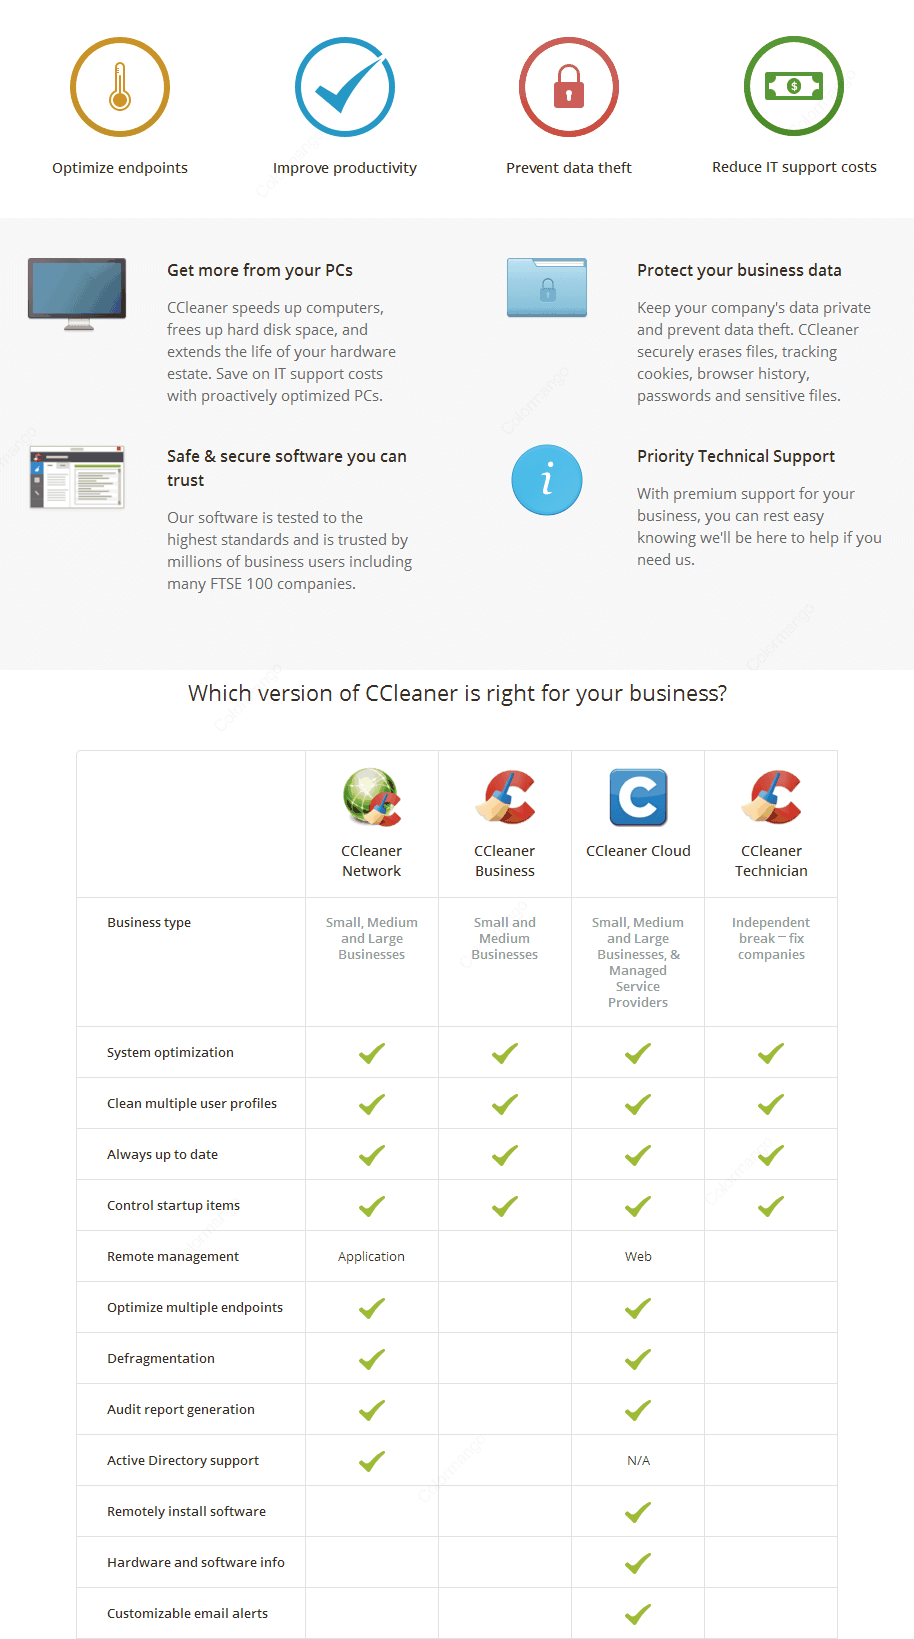 ccleaner professional plus coupon code